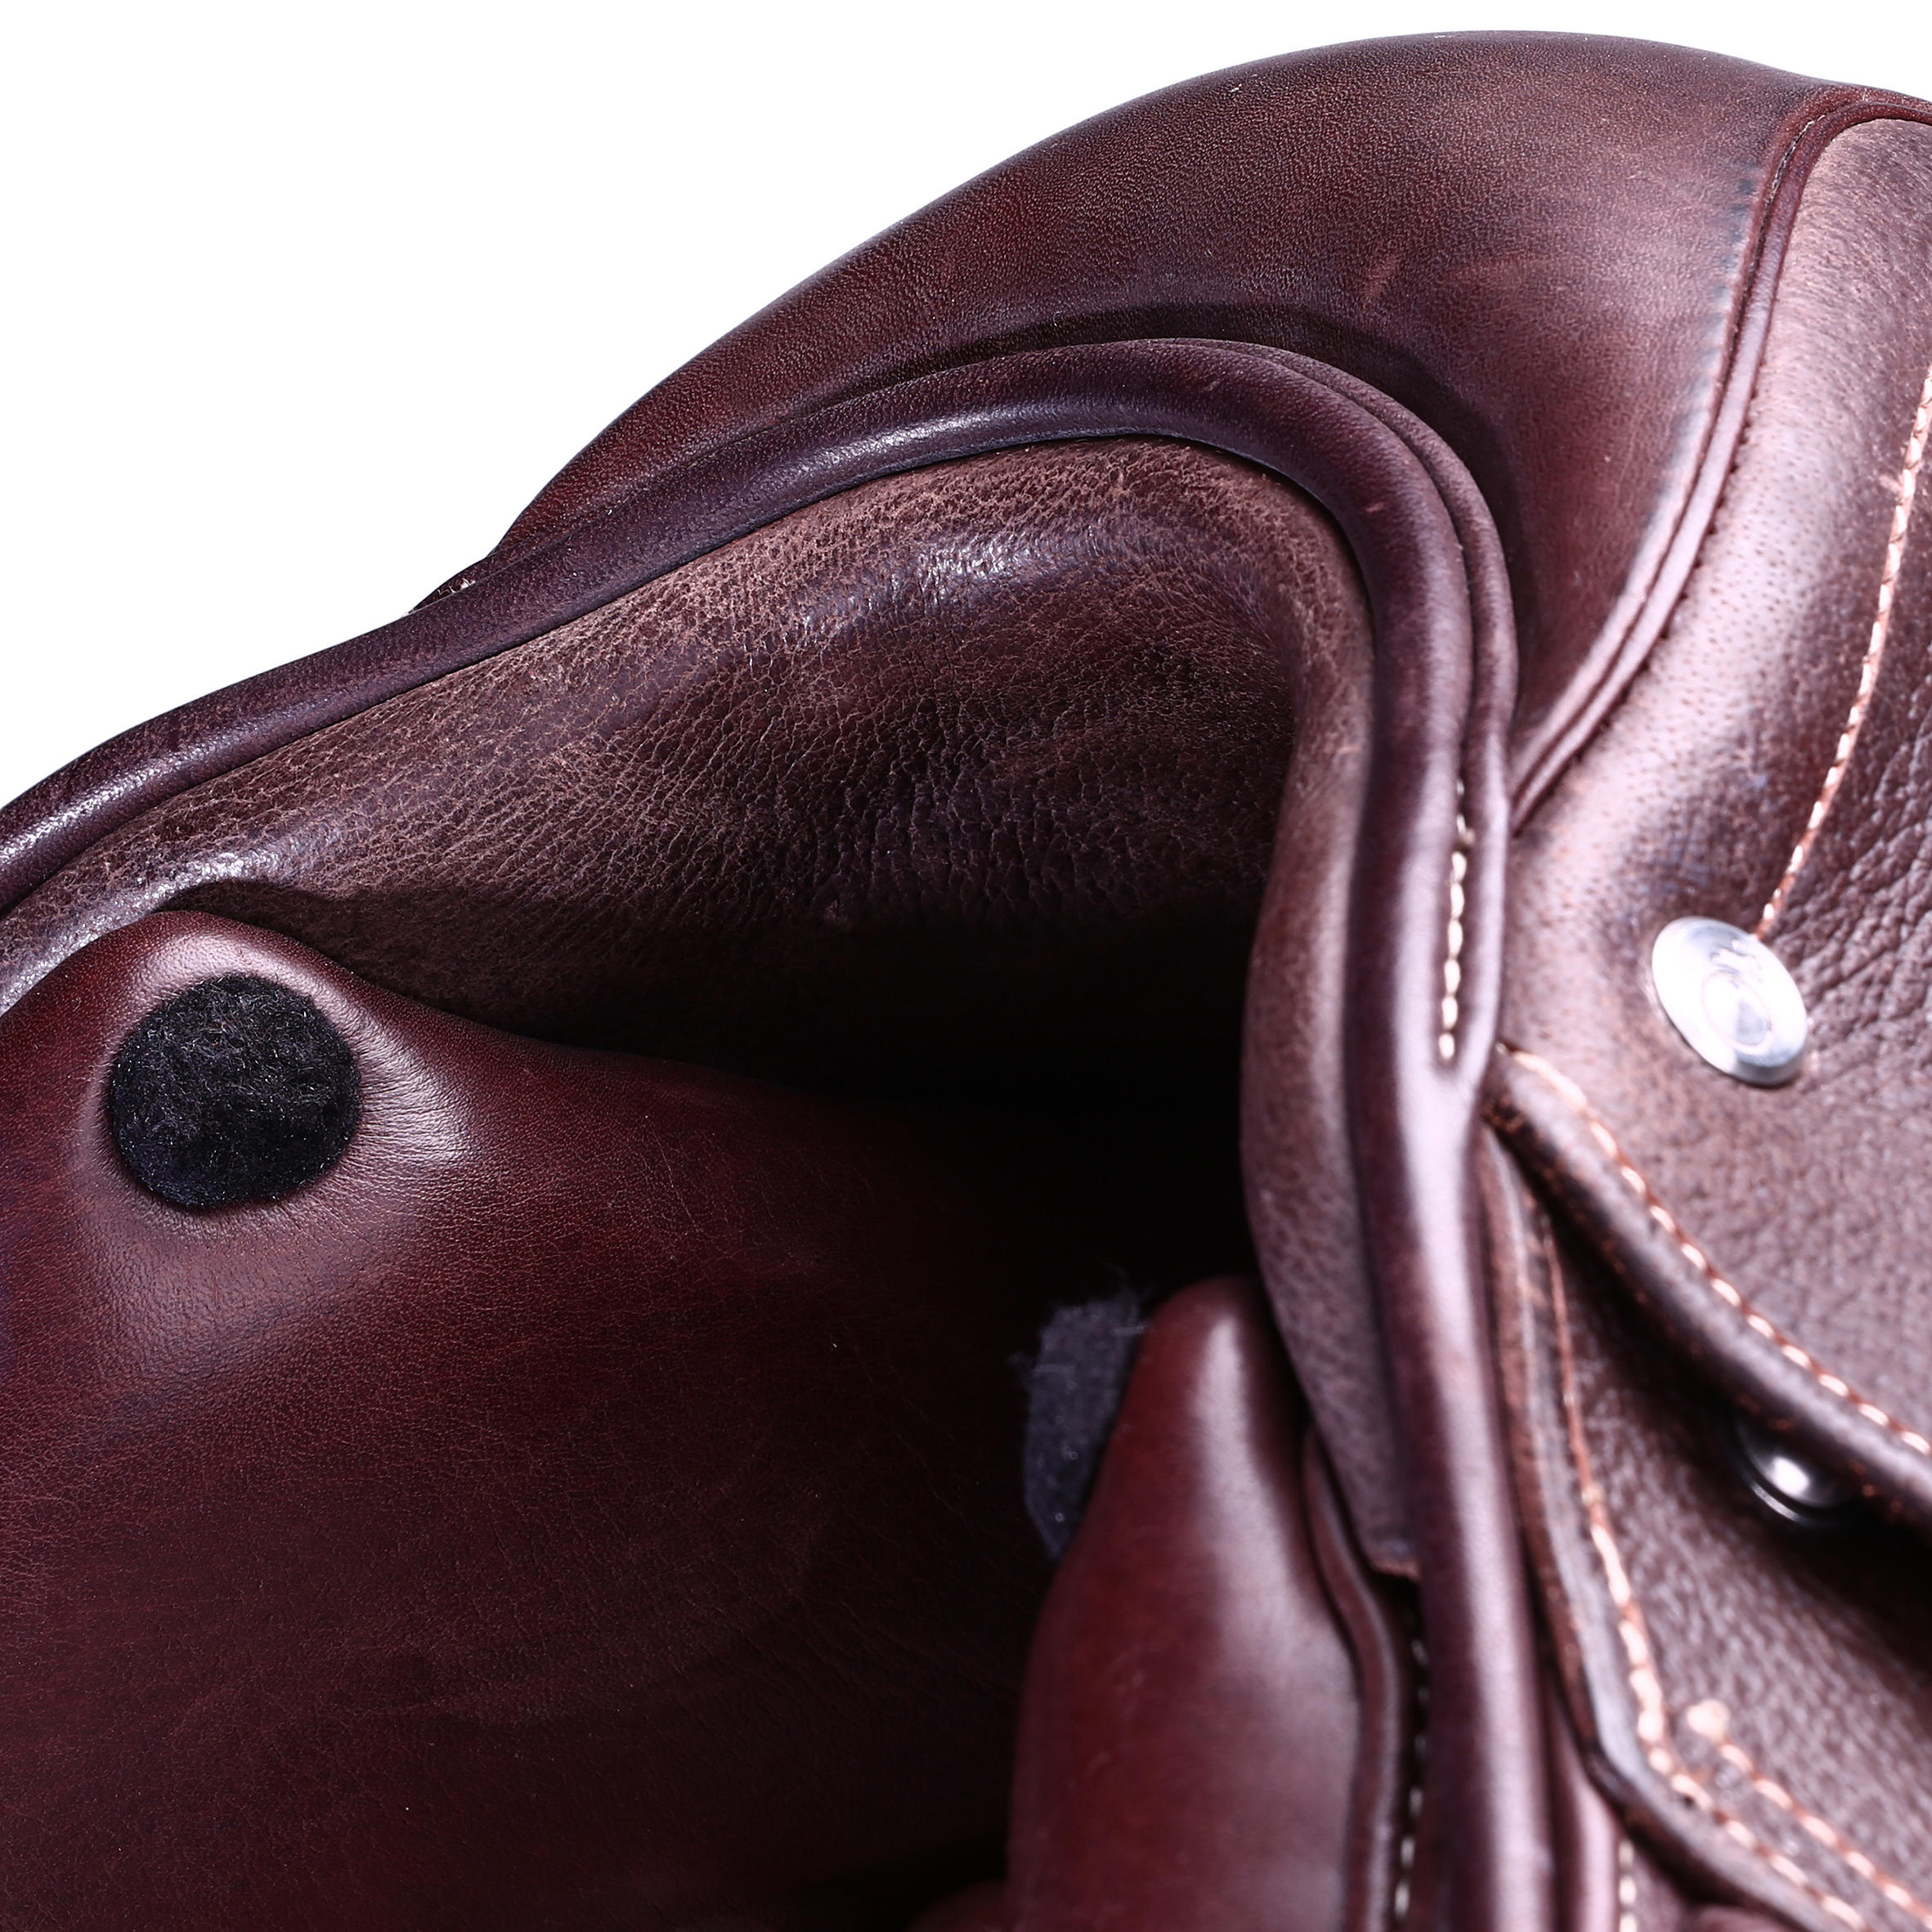 17.5" Versatile Leather Horse Riding Saddle for Horse - Brown 9/15